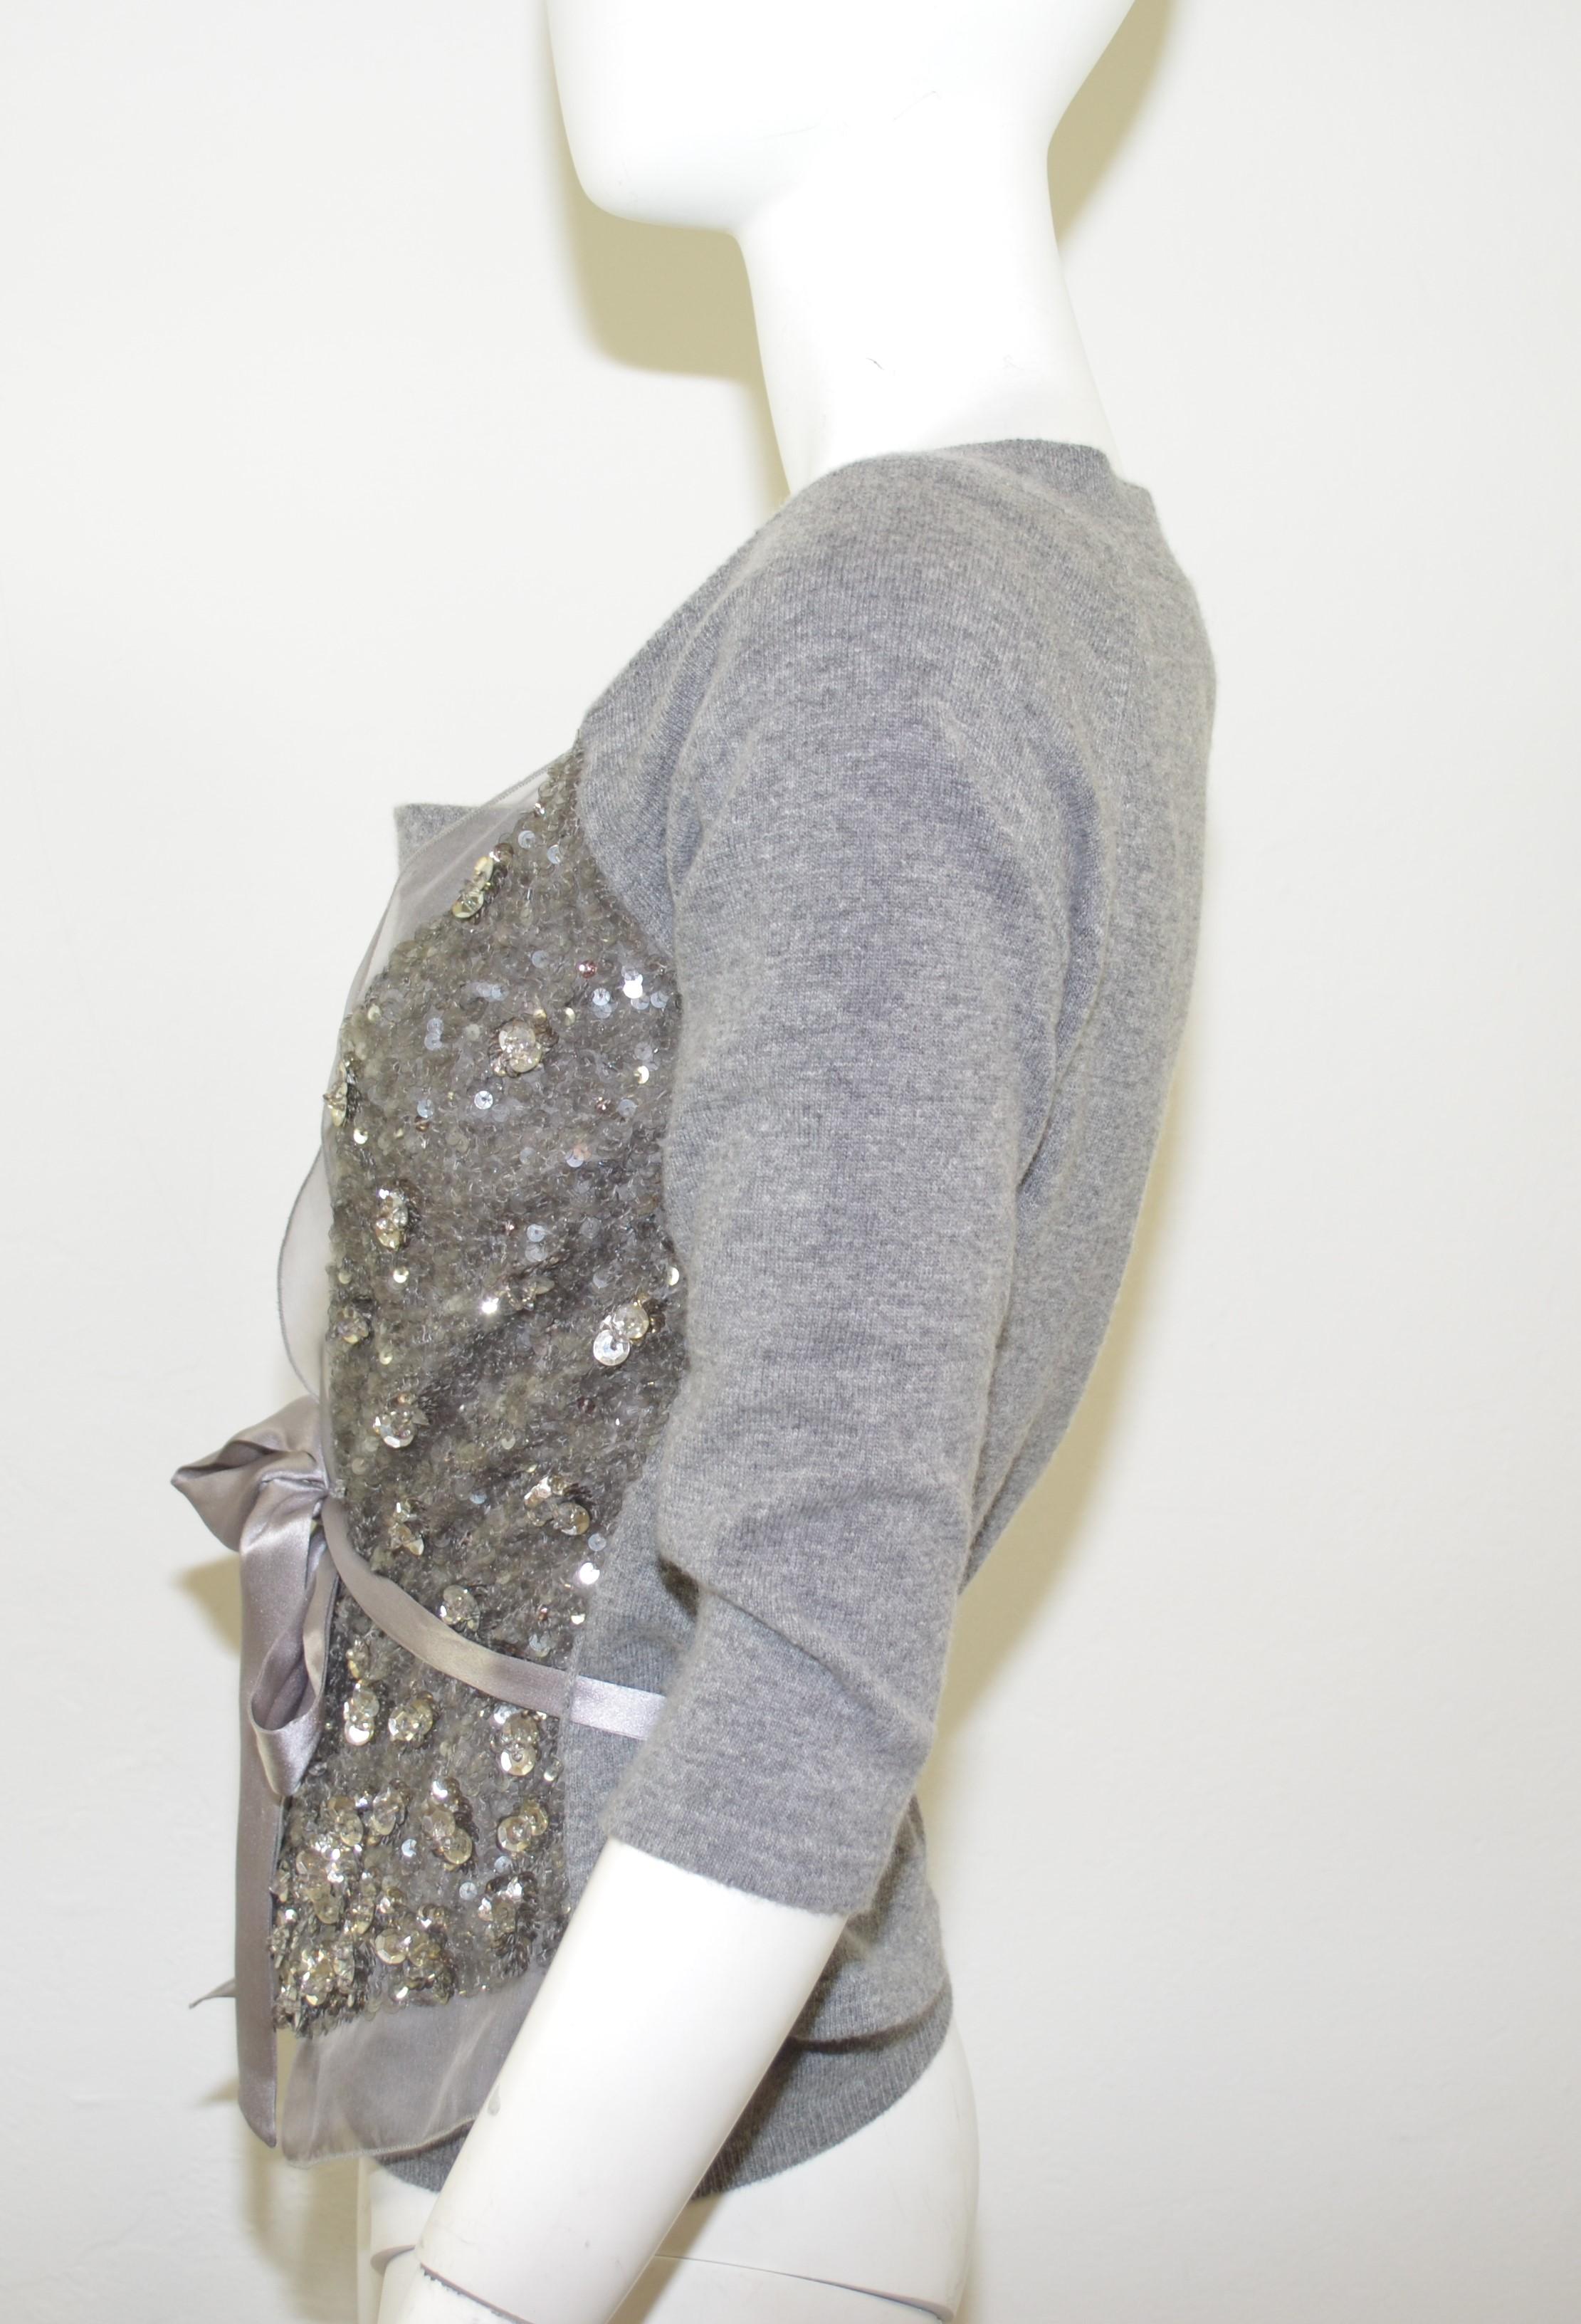 Valentino grey knit cardigan sweater and shell top set feature silver sequin and bead embellishment with a sheer trimming at the front, sweater has a satin self-tie closure at the waist. Shell top has a cowl neckline. 70% wool, 30% cashmere with